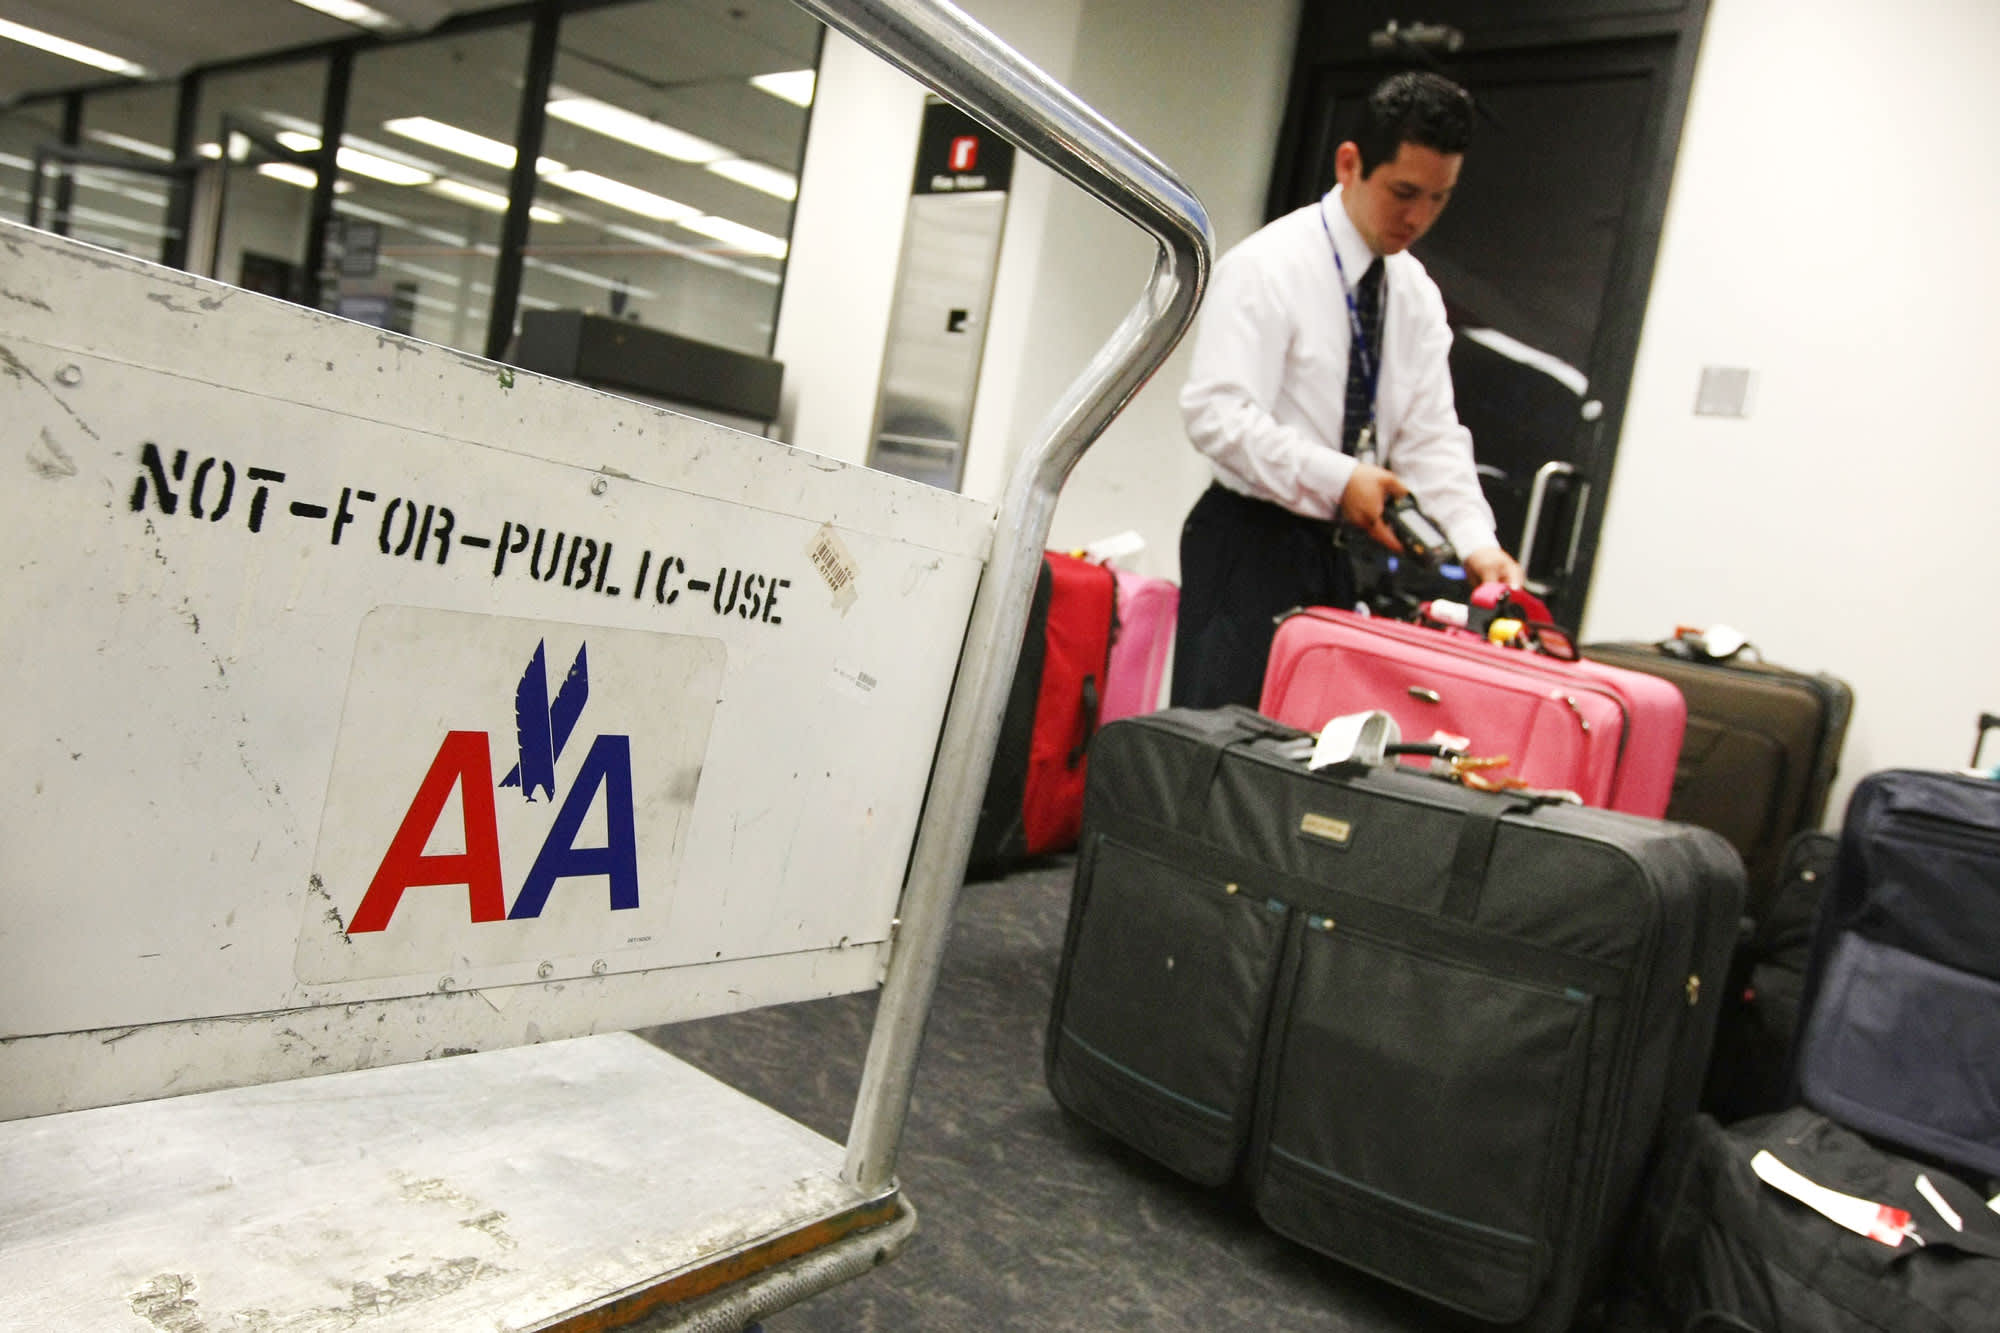 American Airlines Raises Baggage Fees By 5,2 Bedroom Apartments For Rent Near Me